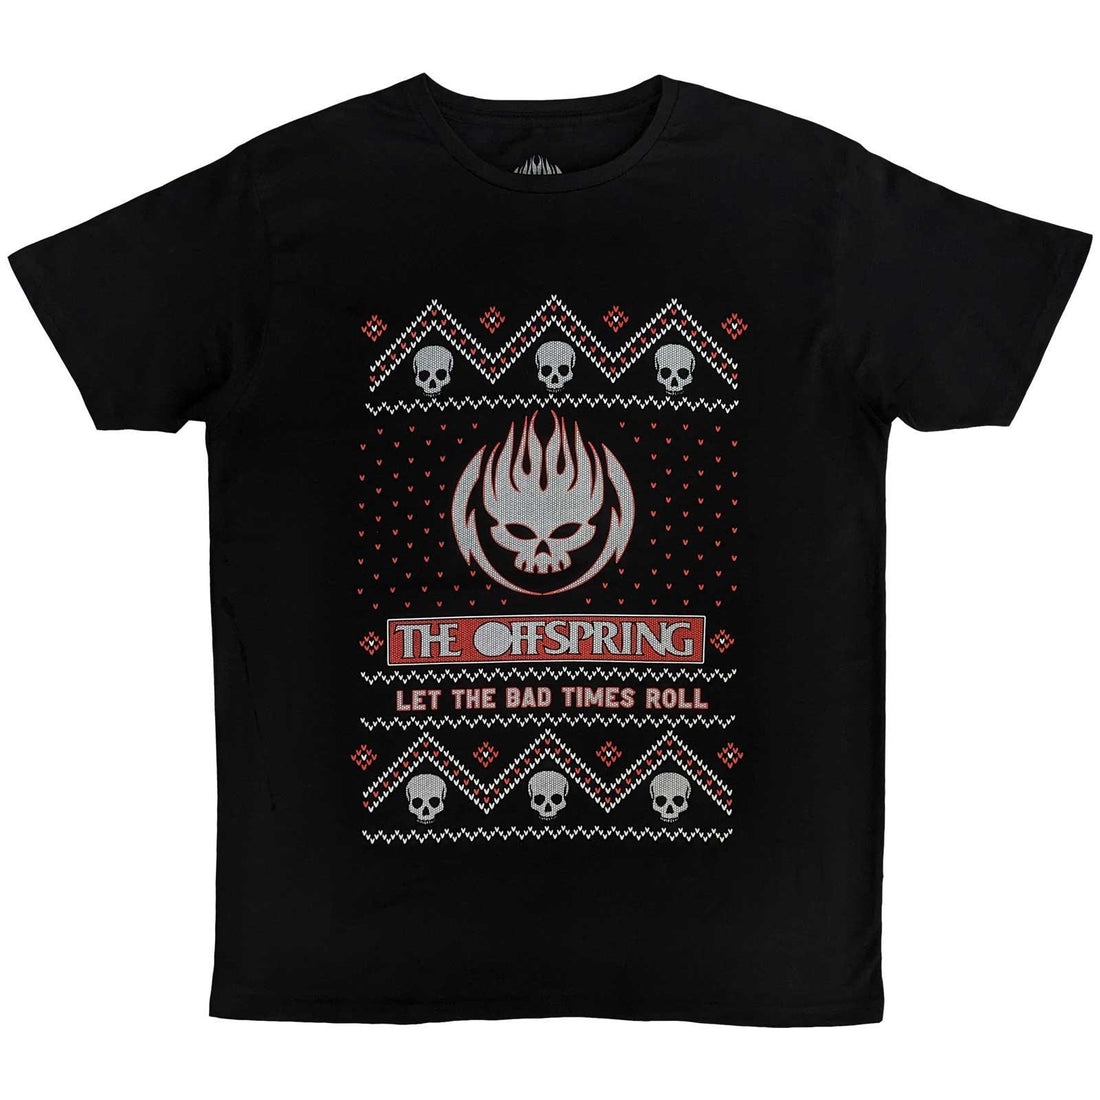 The Offspring Unisex T-Shirt: Christmas Bad Times